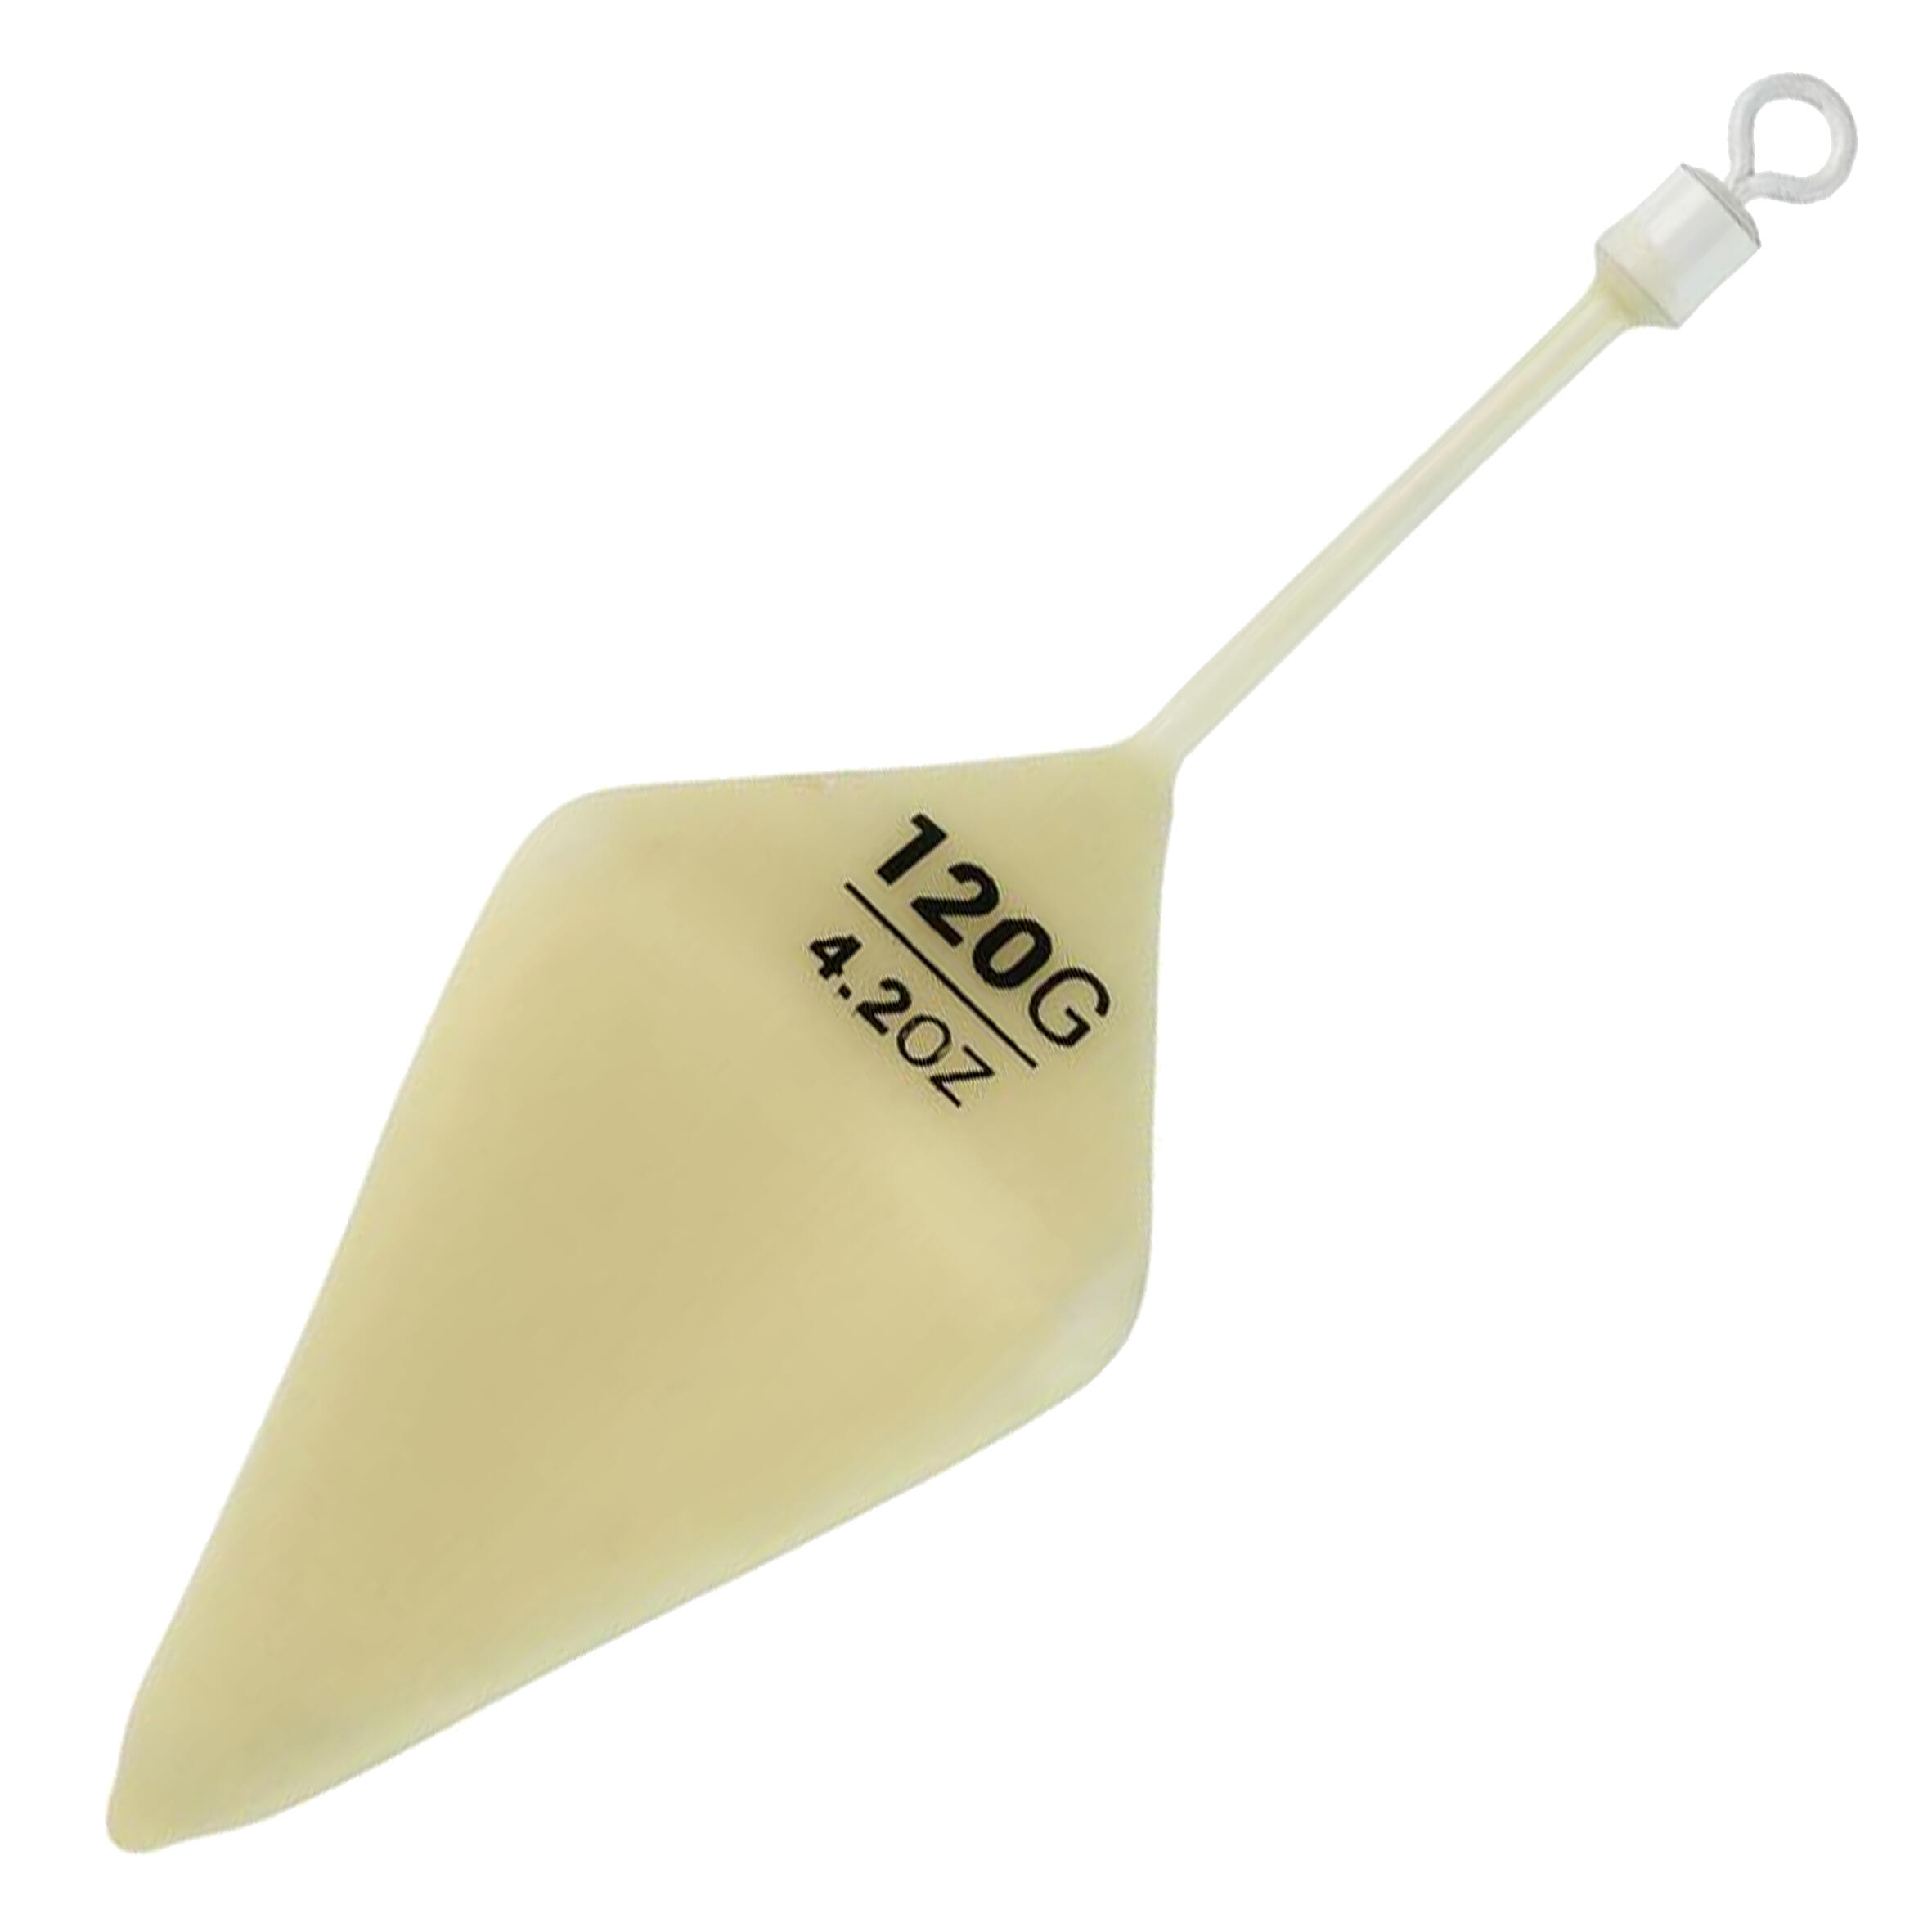 CAPERLAN Glow in the Dark Silicone Pyramid Sinker for surfcasting